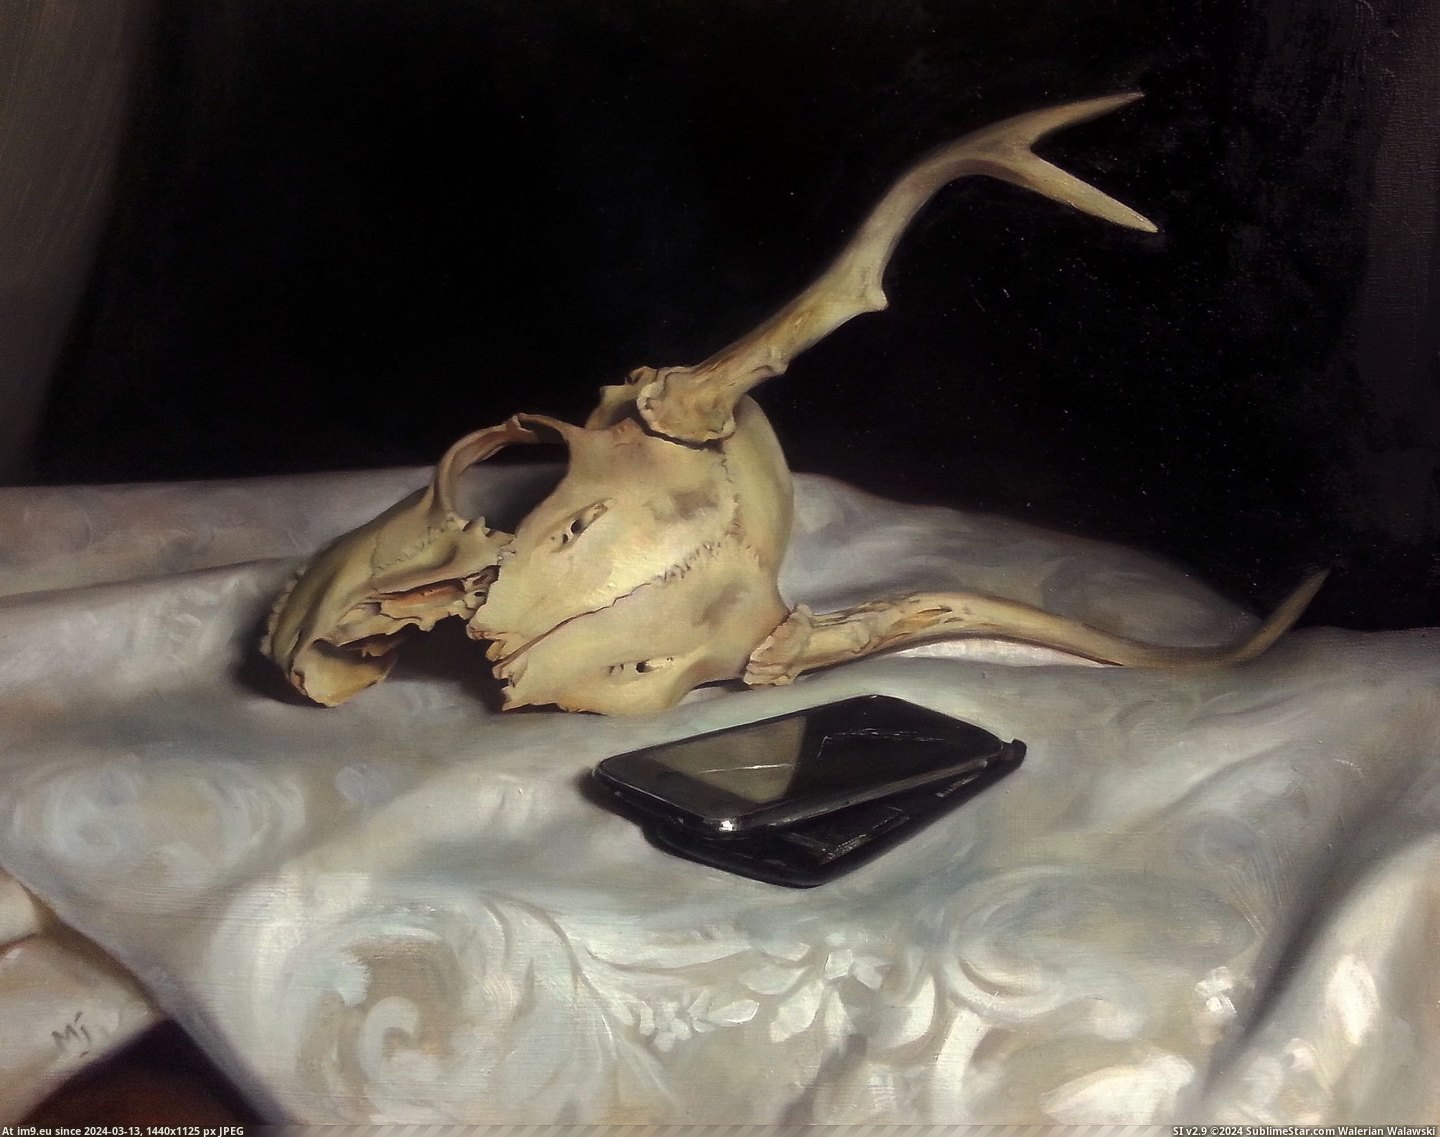 #For #Time #Old #Painting #Project #Finished #Broken #Skull #Life #Shit #Phone #Load [Pics] I just finished painting an old broken phone and skull for a still life project from life, it took a shit load of time an Pic. (Bild von album My r/PICS favs))